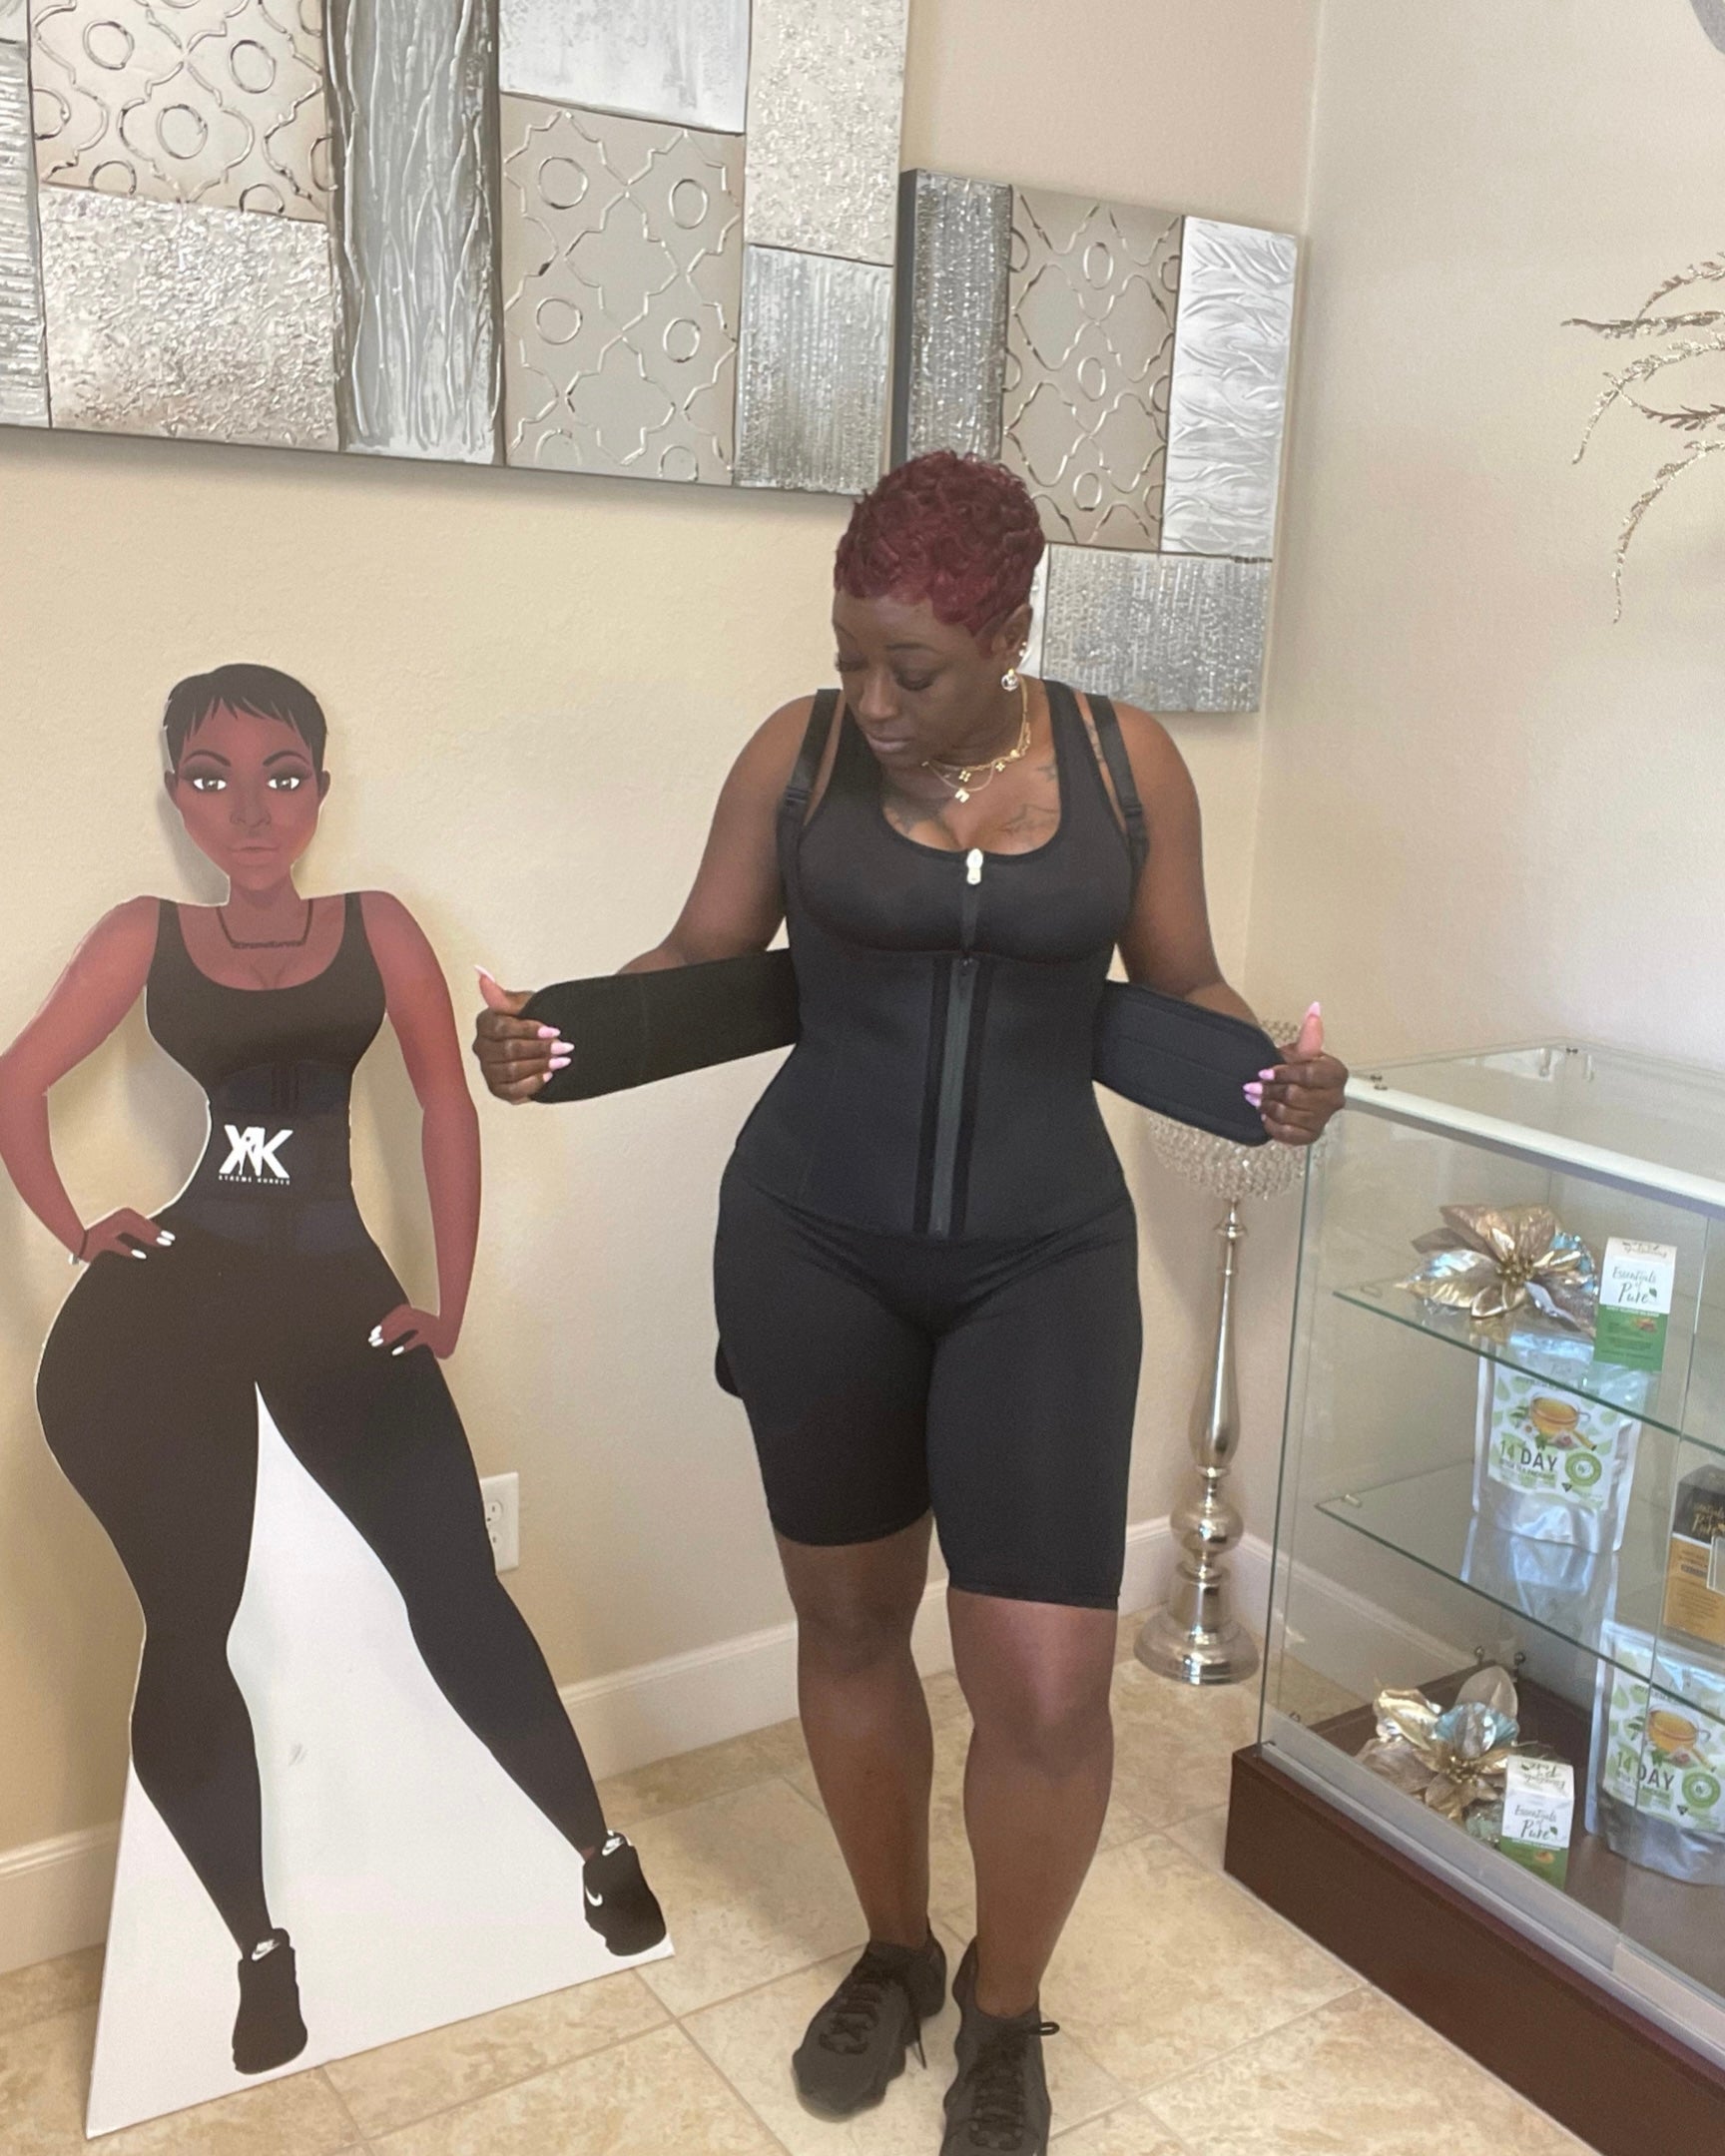 SNATCHED UP BY XK FULL BODY SHAPER